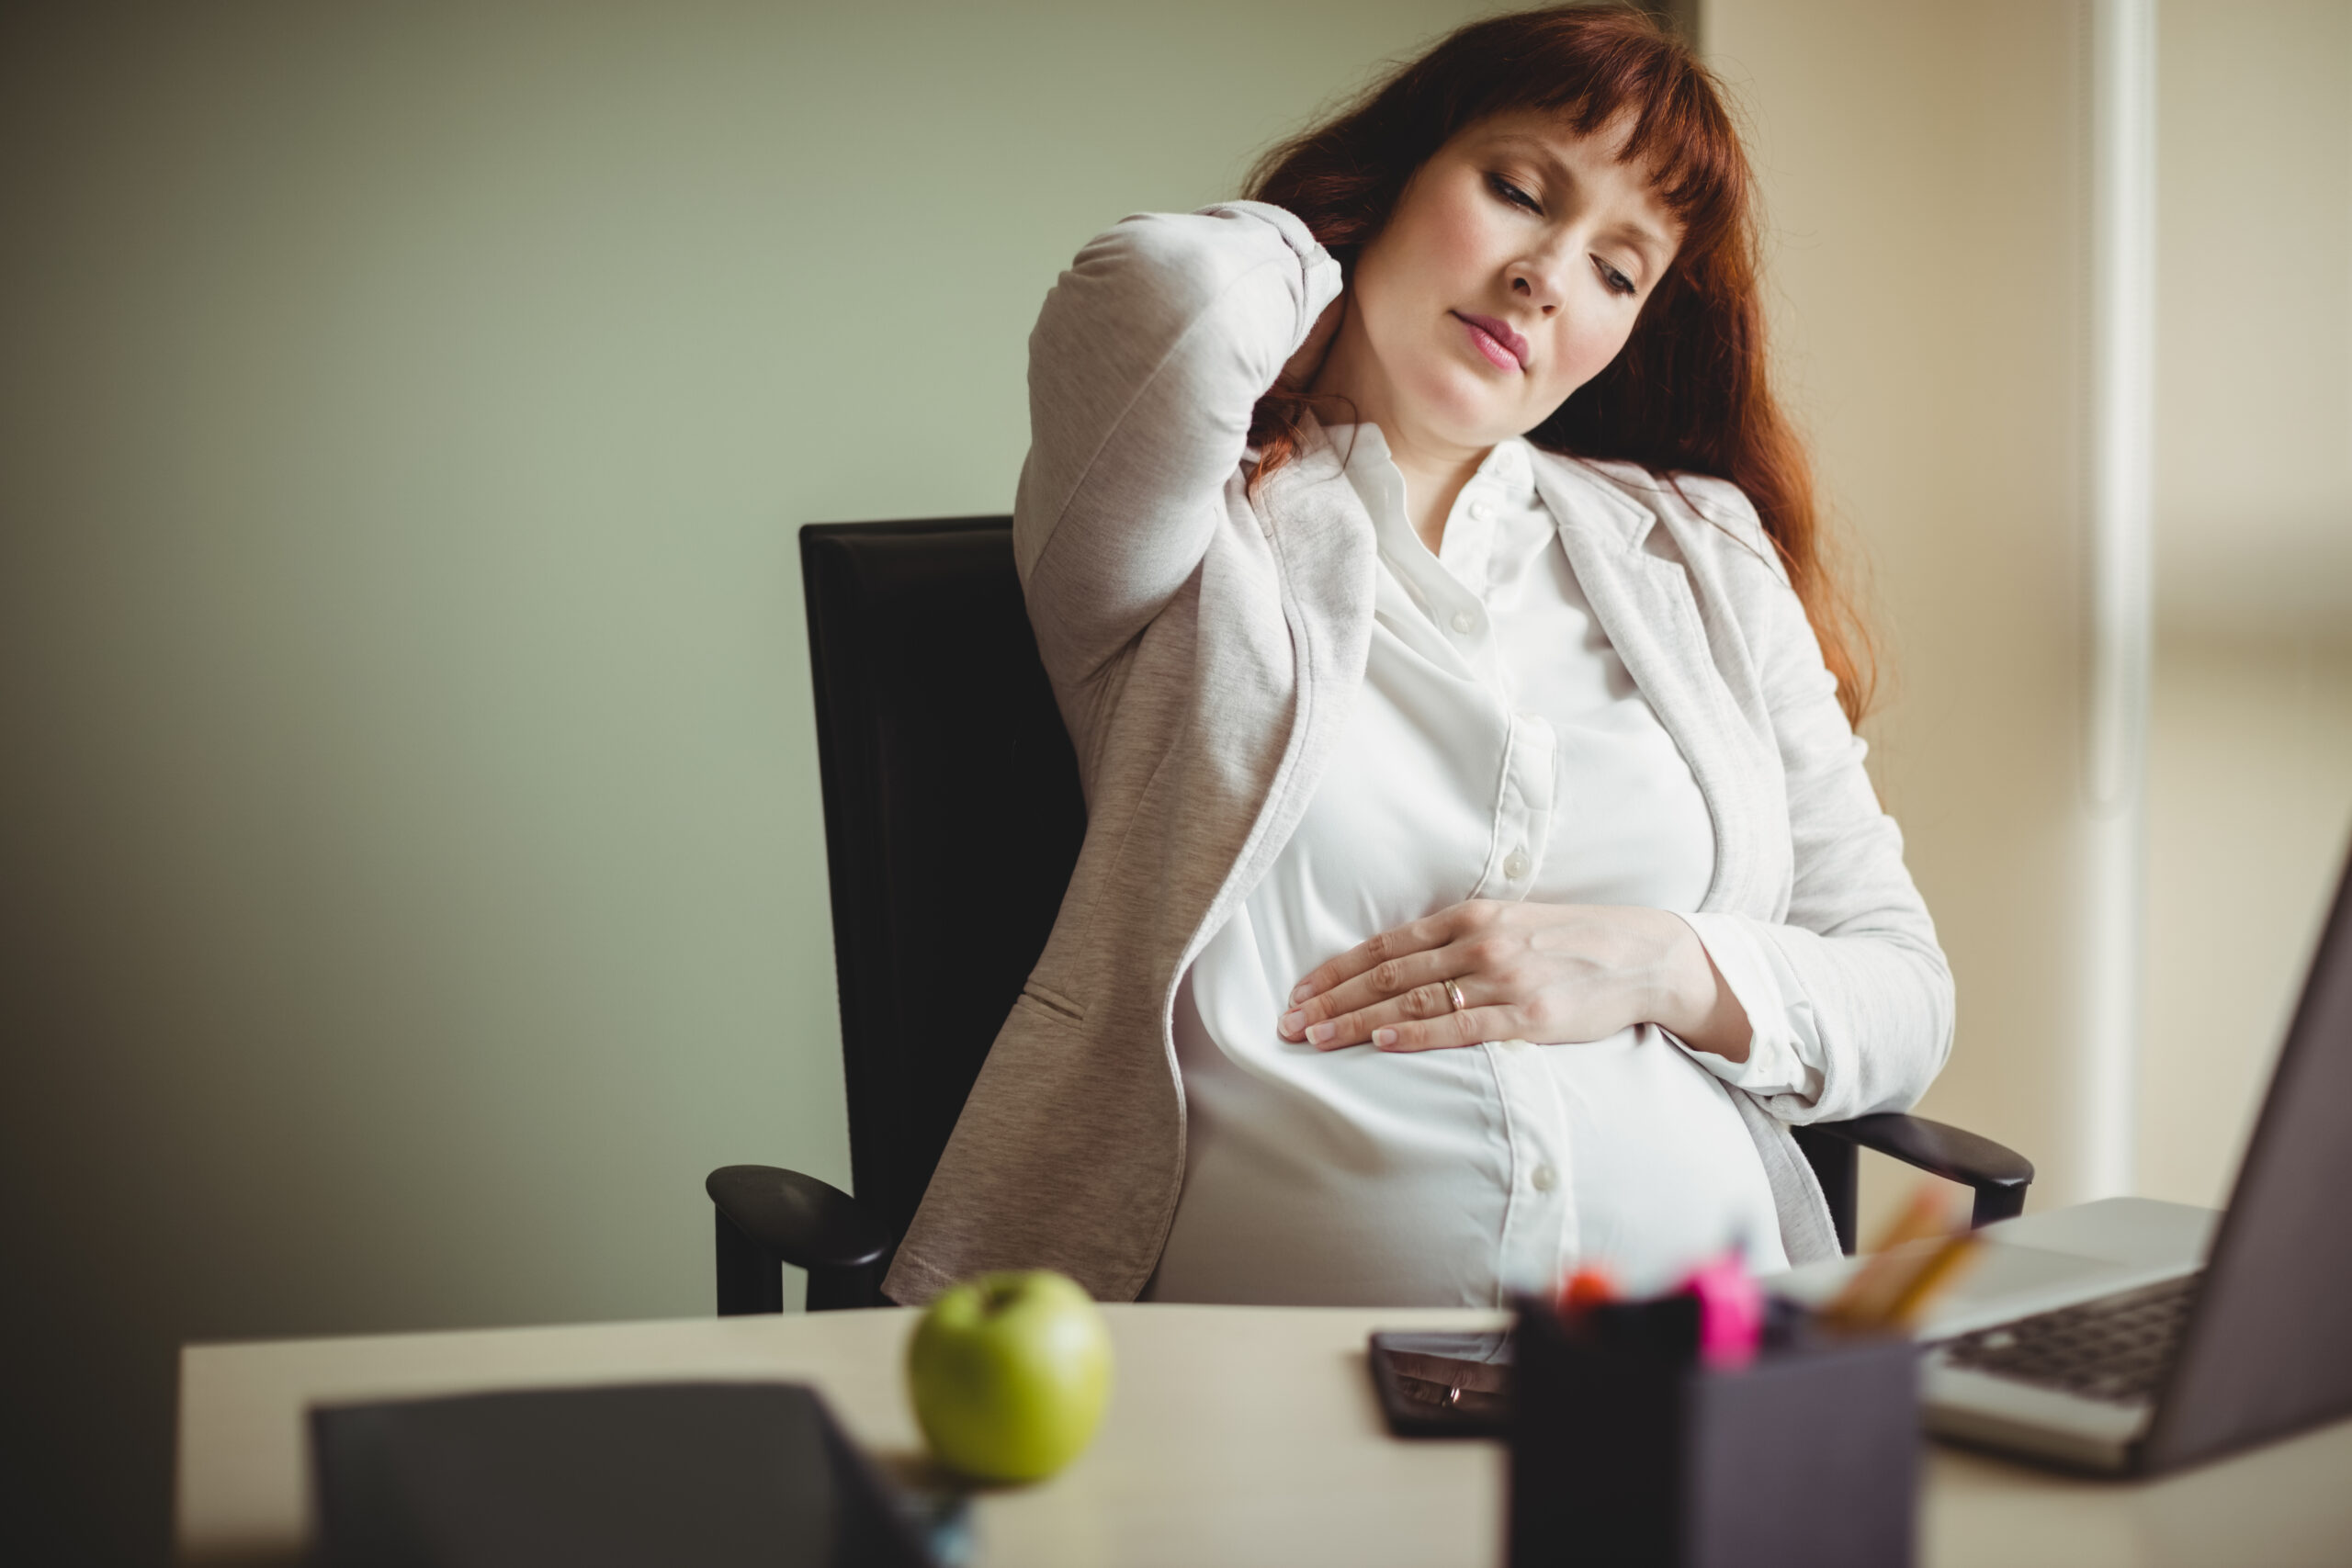 Pregnancy back pain presents a range of symptoms that can vary from woman to woman